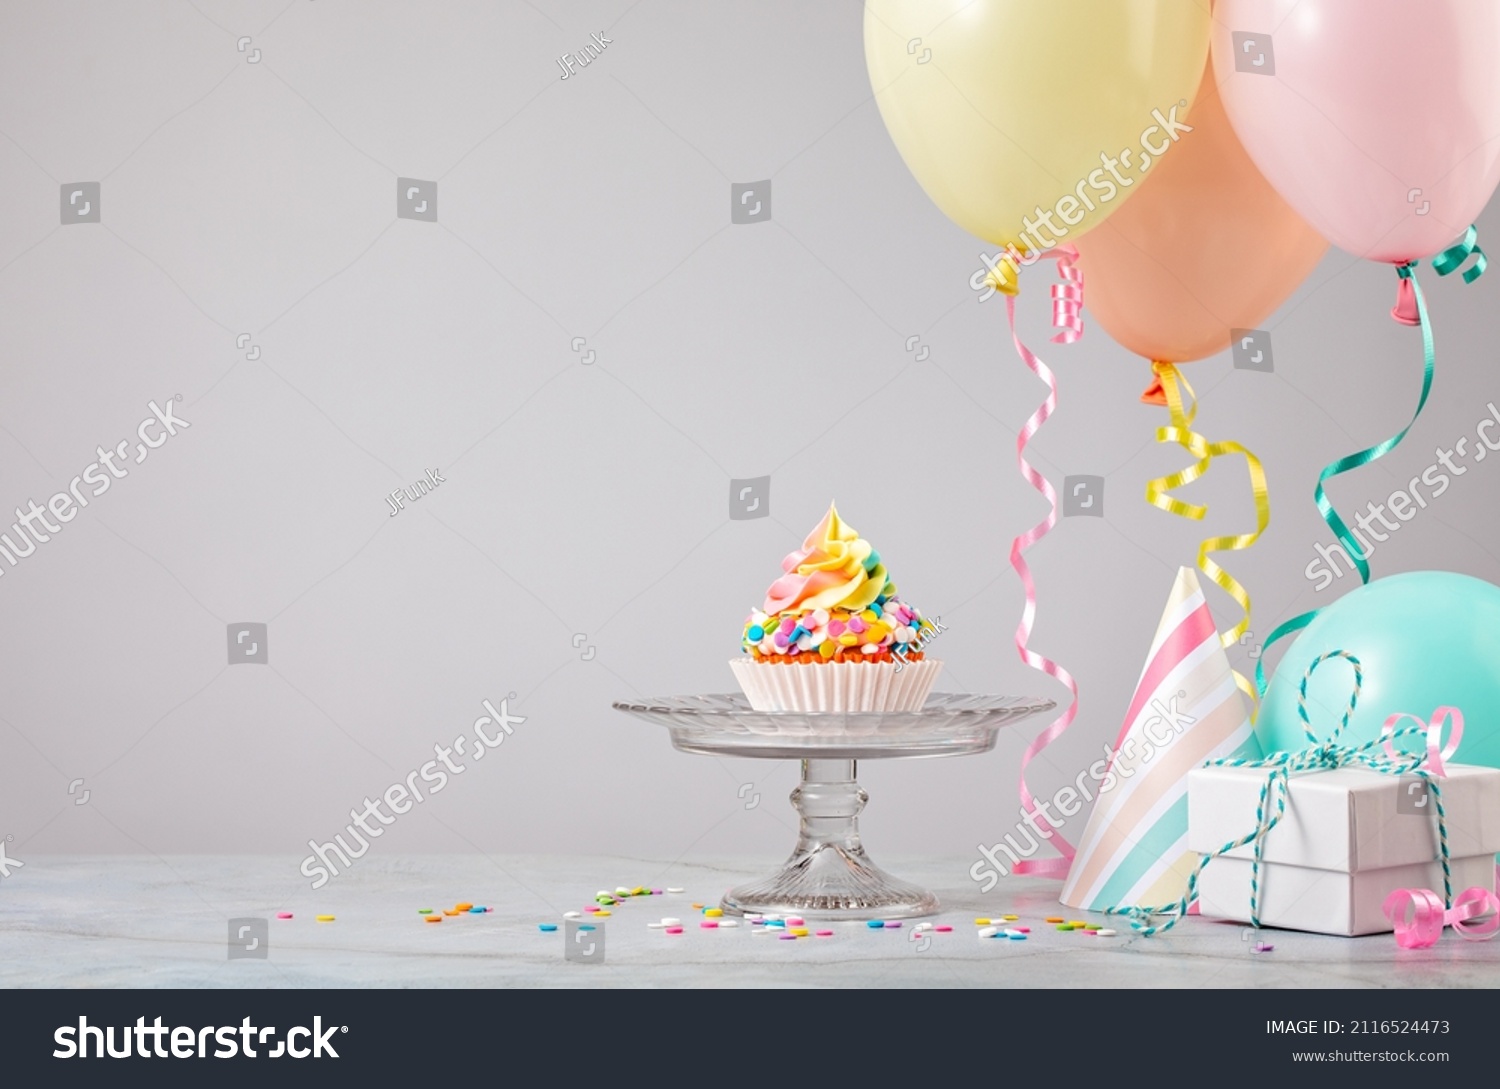 Rainbow Birthday cupcake on a stand with presents, hats and colorful balloons over light grey background. Scene from a birthday party! #2116524473